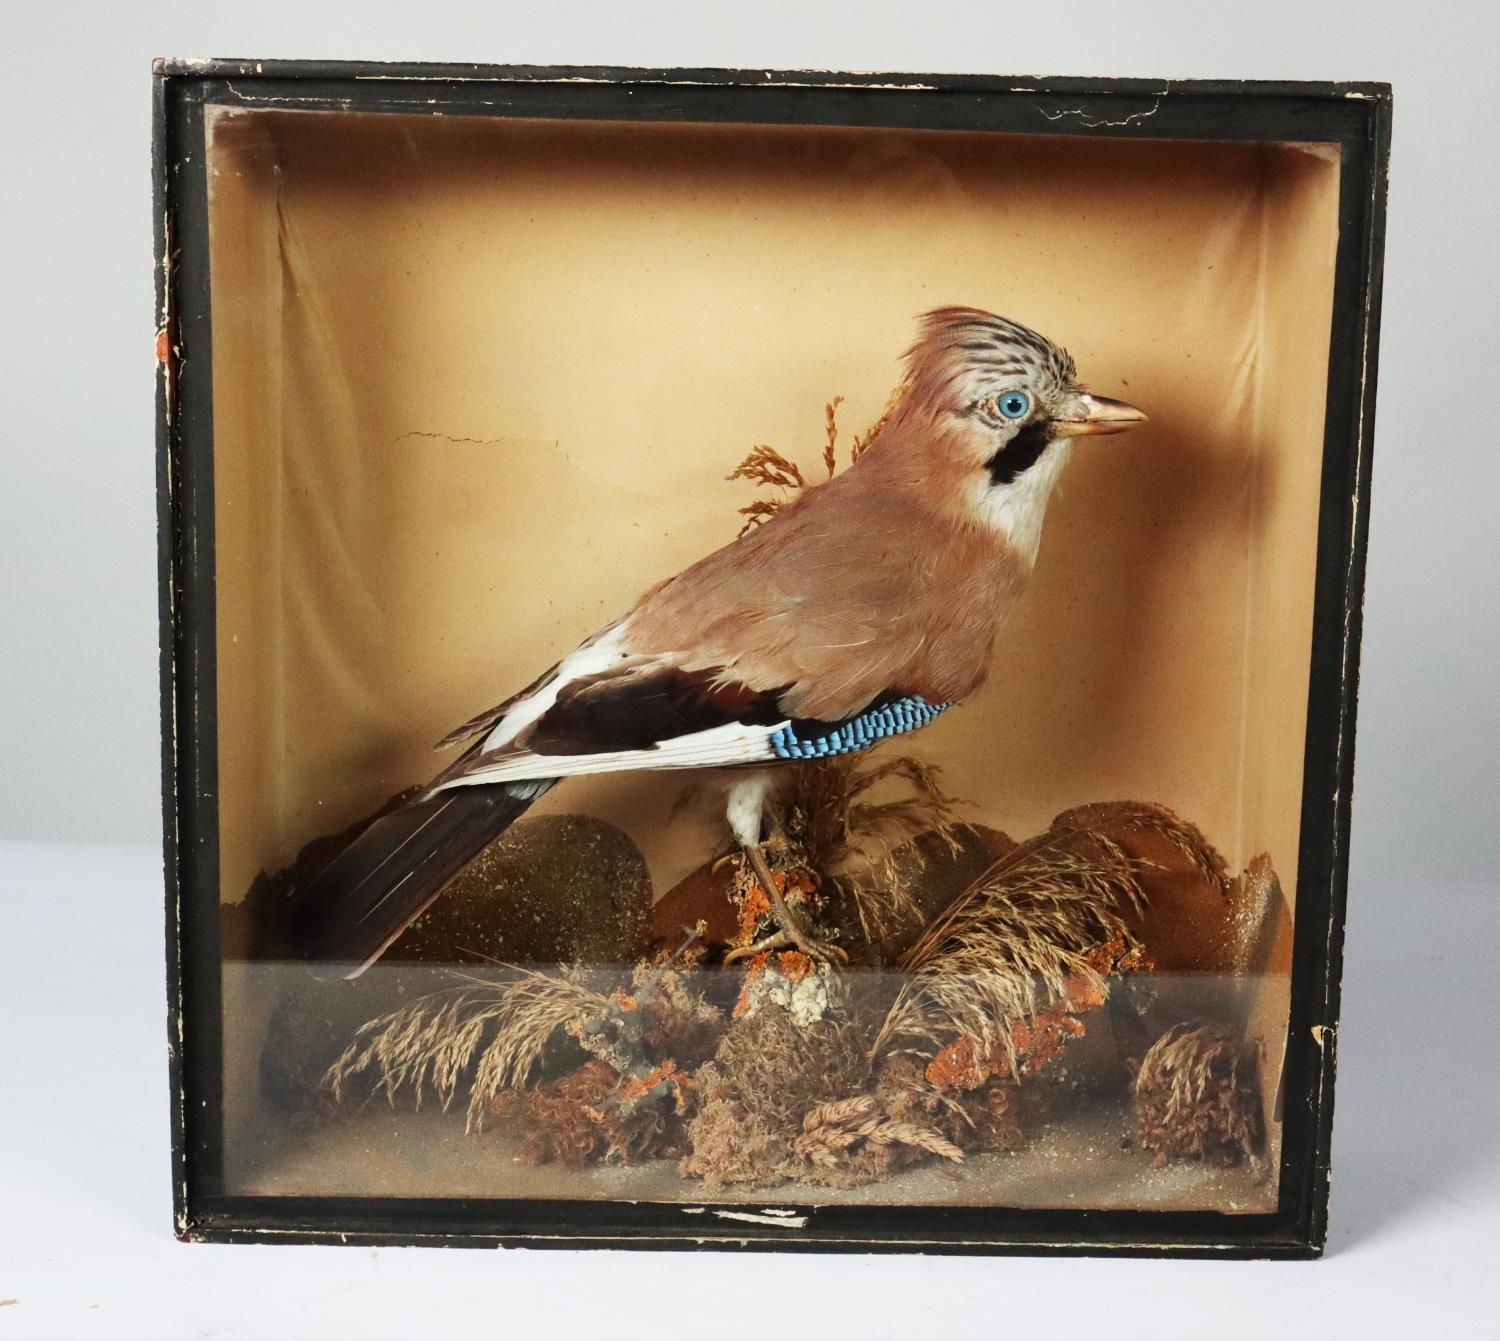 TAXIDERMY, EDWARDIAN CASED SPECIMEN OF A JAY BY G. HALL, ETON, modelled perched with grasses and